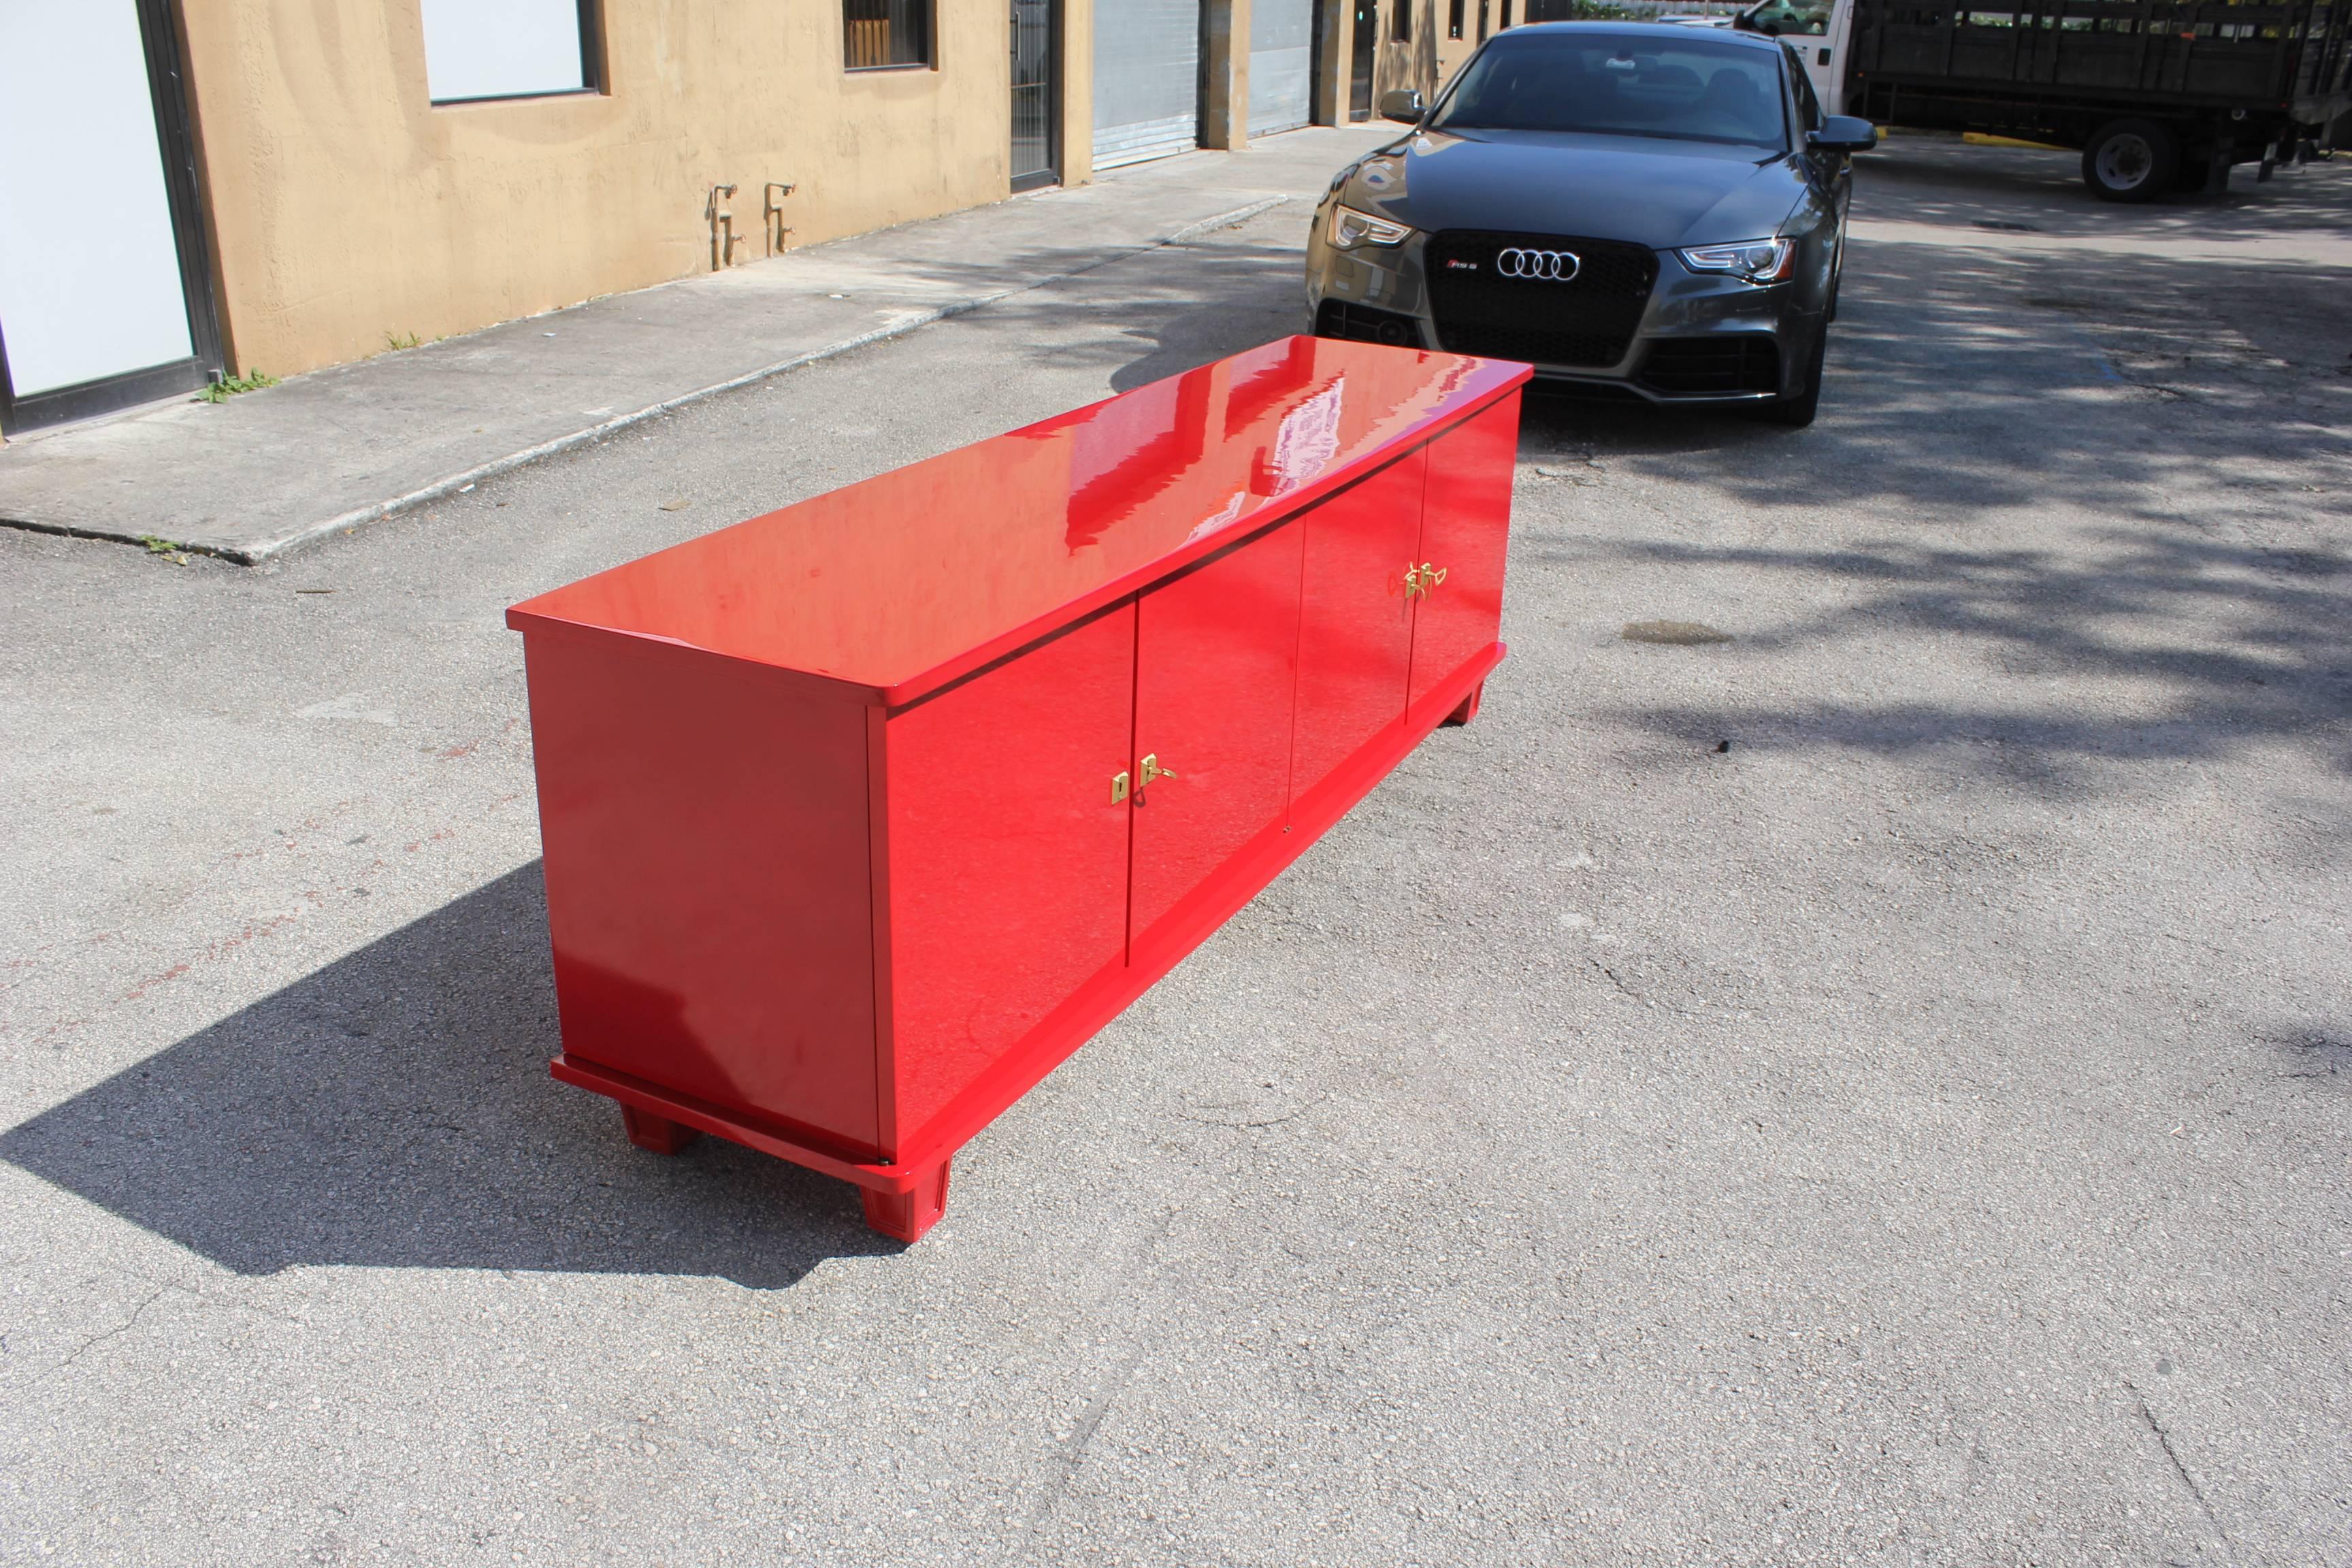 A French Art Deco / Art Modern red cherry lacquered buffet, sideboard or bar high gloss finish. Beautifully, circa 1940s. Newly lacquered inside and out, bar area all keys present.